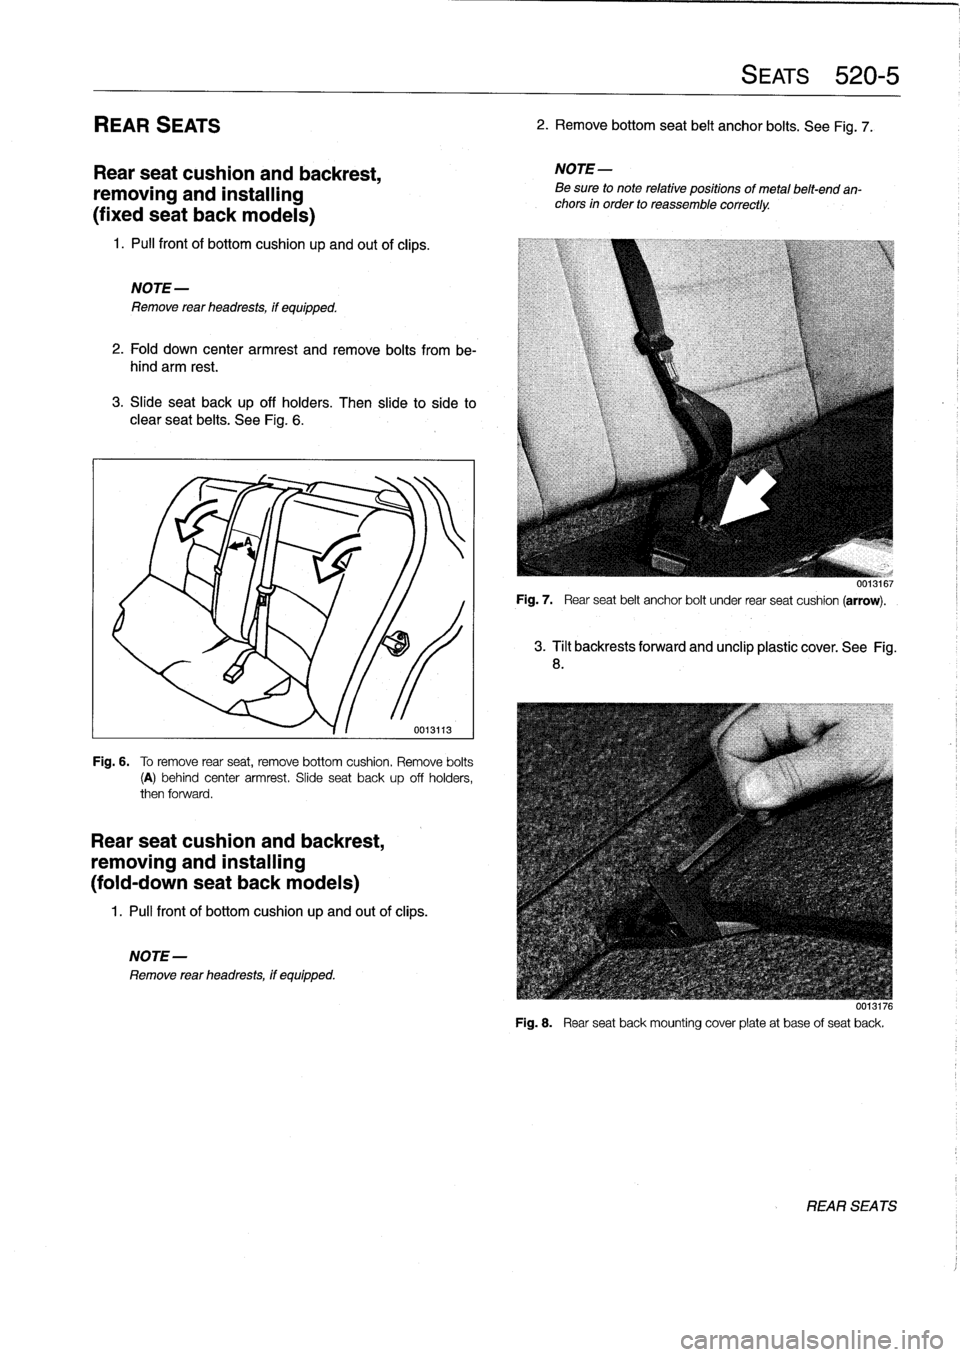 BMW M3 1998 E36 Workshop Manual 
REAR
SEATS

Rear
seat
cushion
and
backrest,

removing
and
installing

(fixed
seat
back
modeis)

1
.
Pull
front
of
bottomcushion
up
and
out
of
clips
.

NOTE-

Remove
rear
headrests,
if
equipped
.

2
.